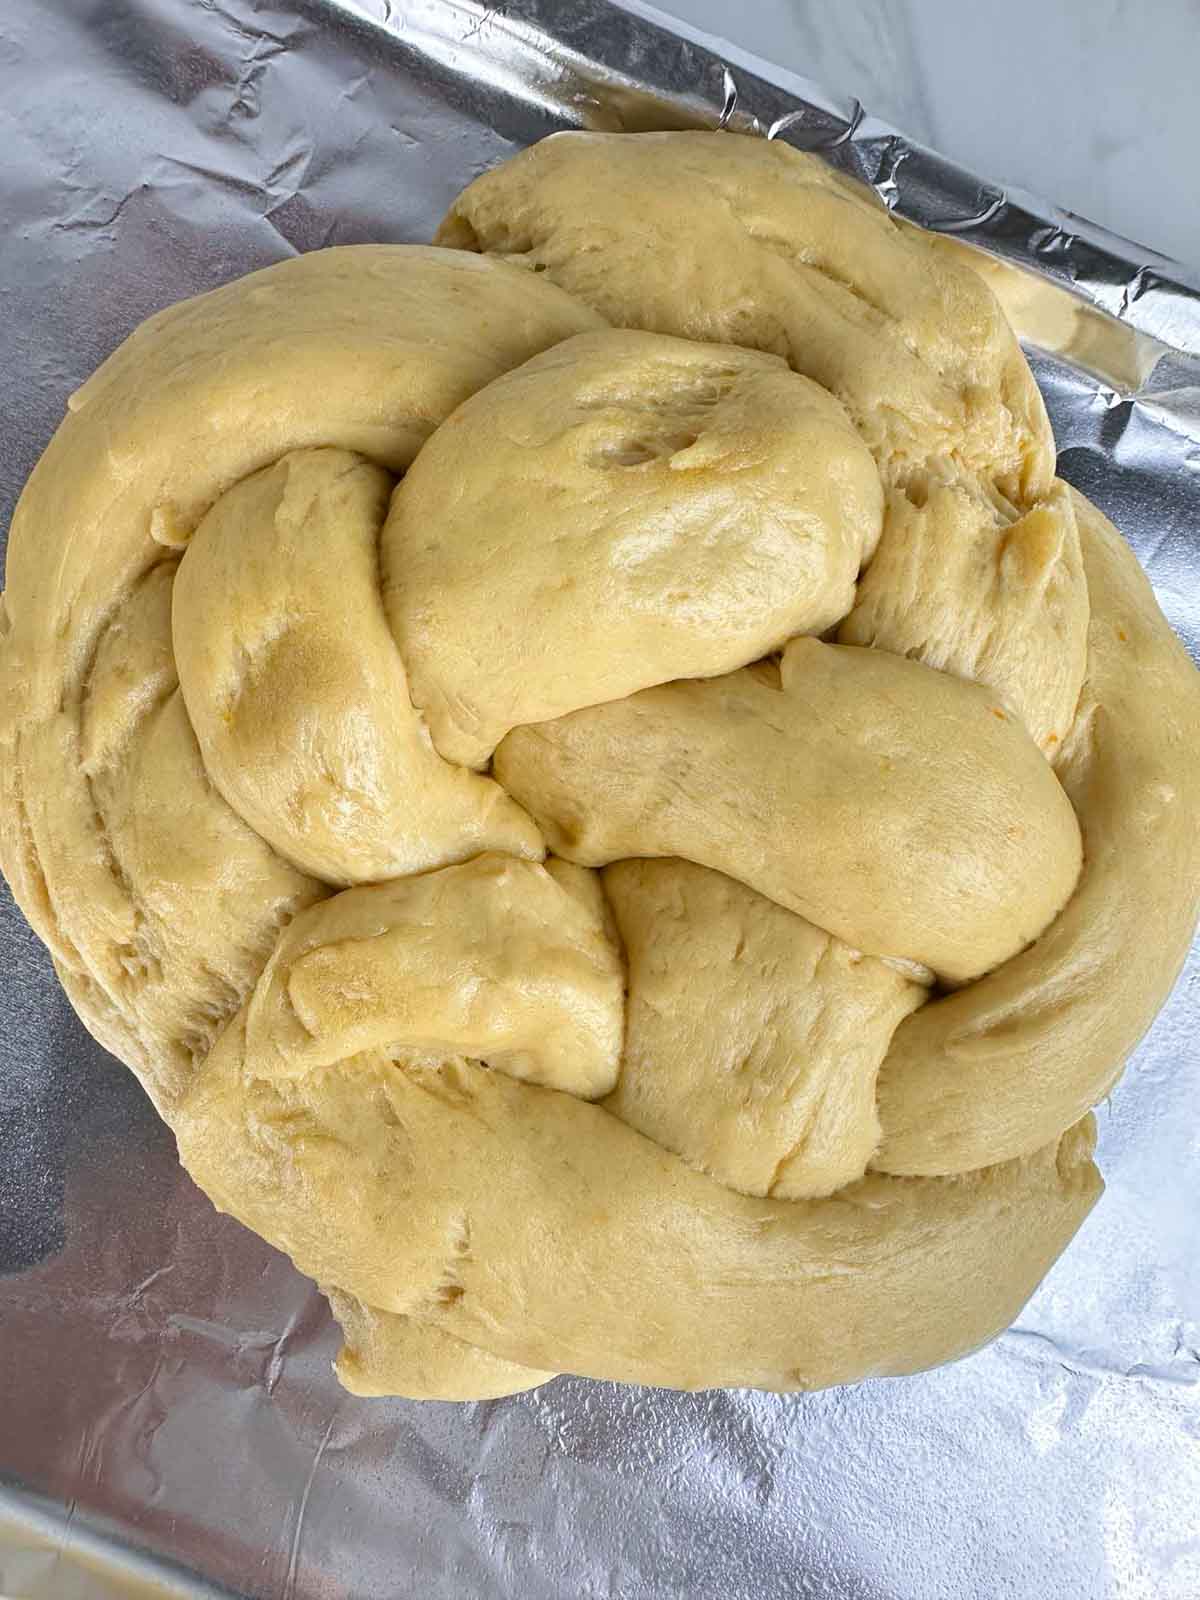 The Italian Easter bread after the third rise